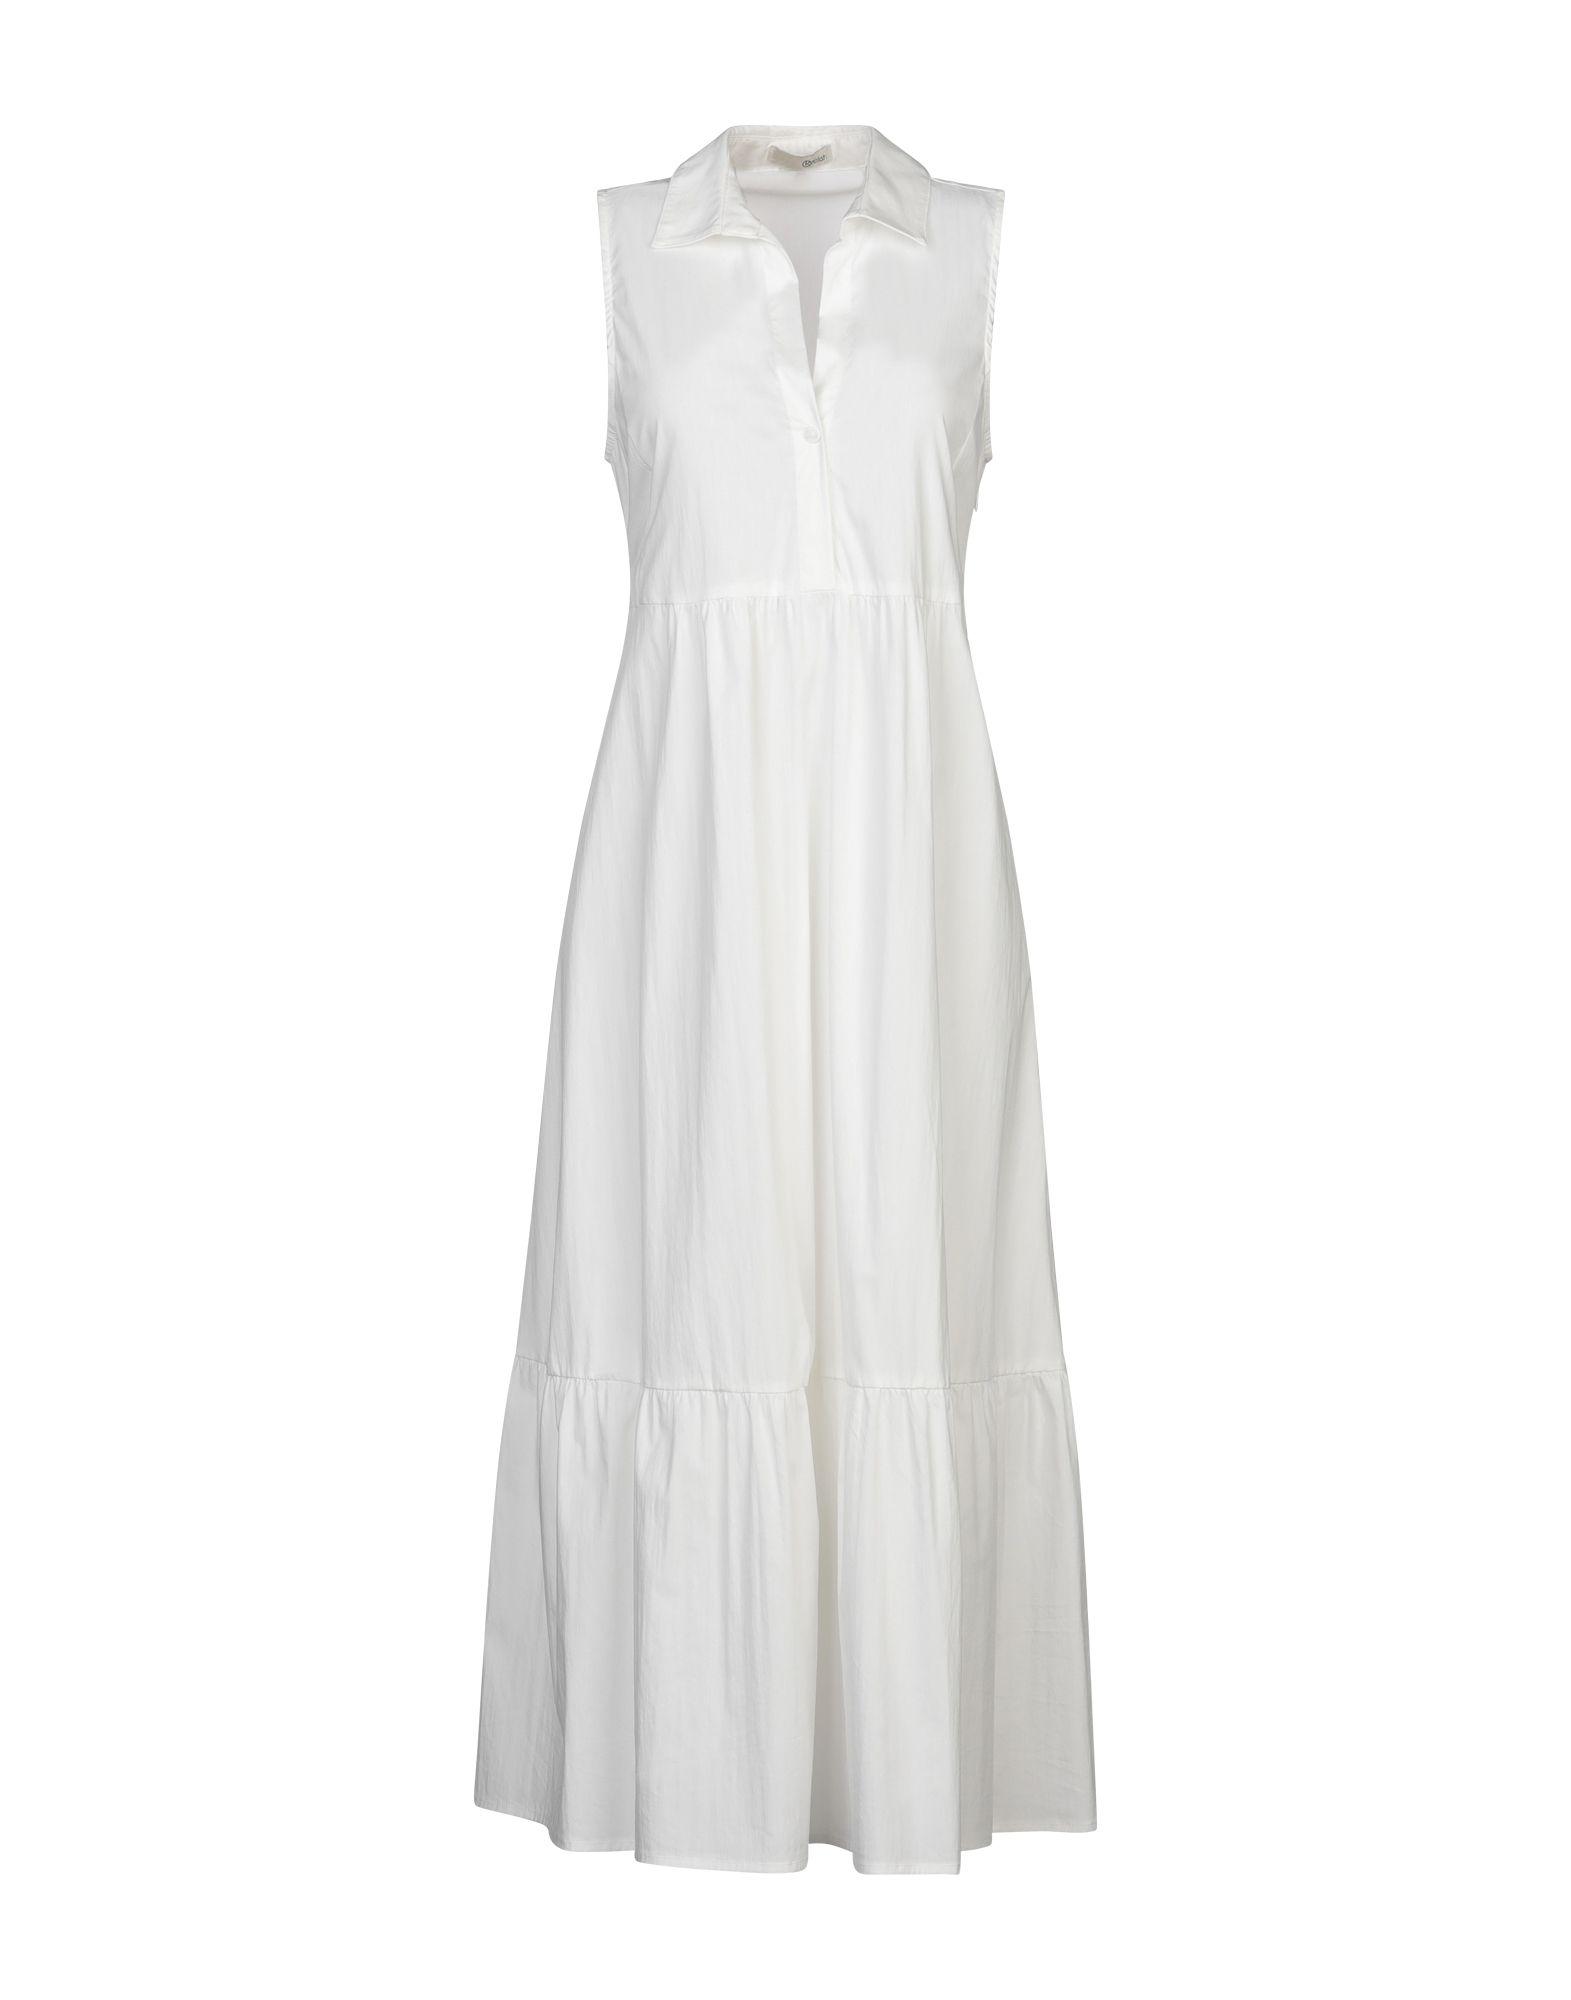 Relish 3/4 Length Dress in White - Lyst